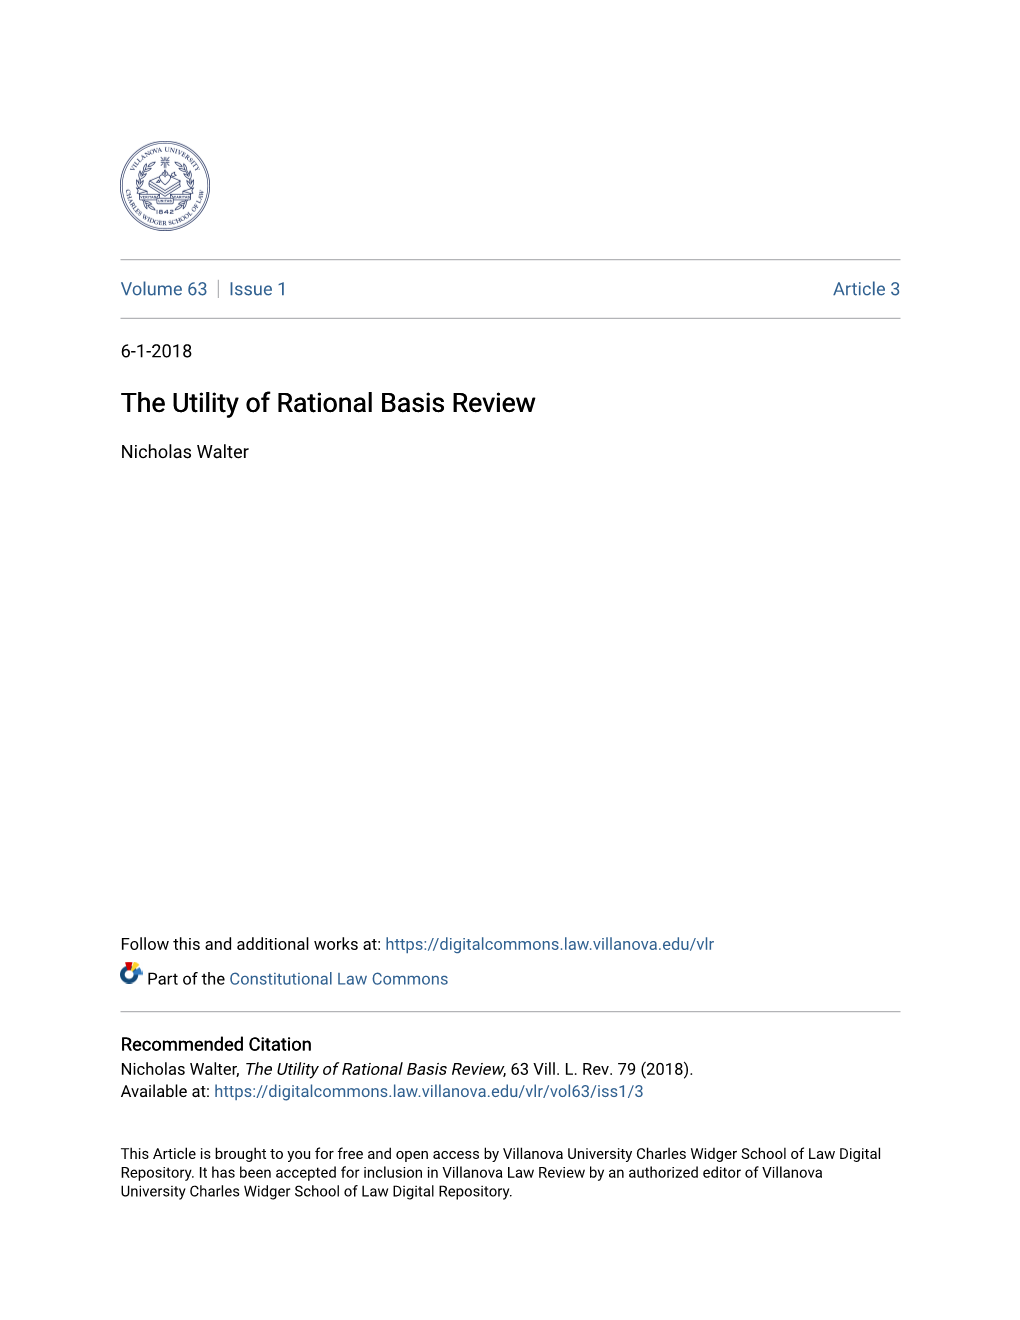 The Utility of Rational Basis Review